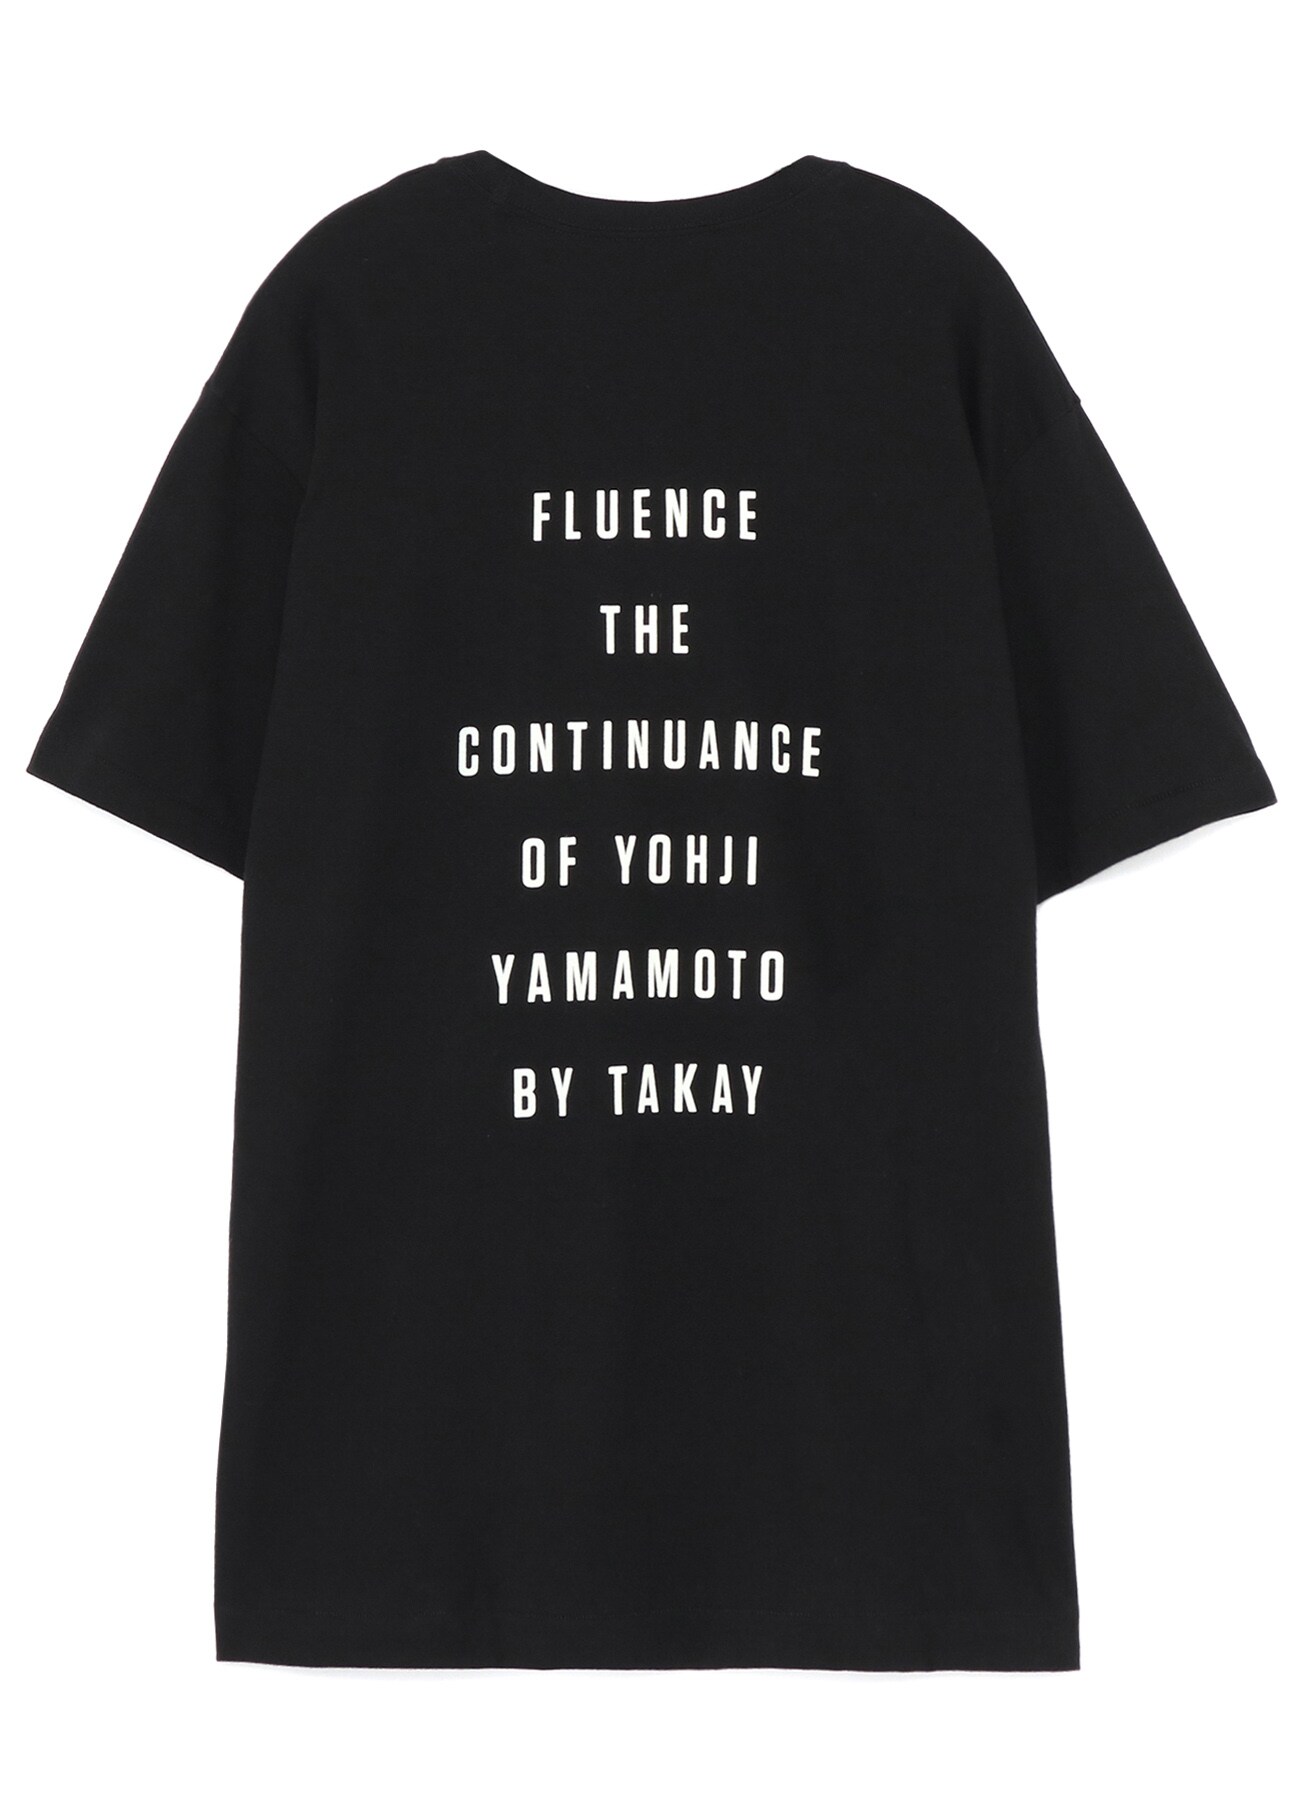 S'YTE × Fluence Collaboration T-shirt <LILY FRANKY>